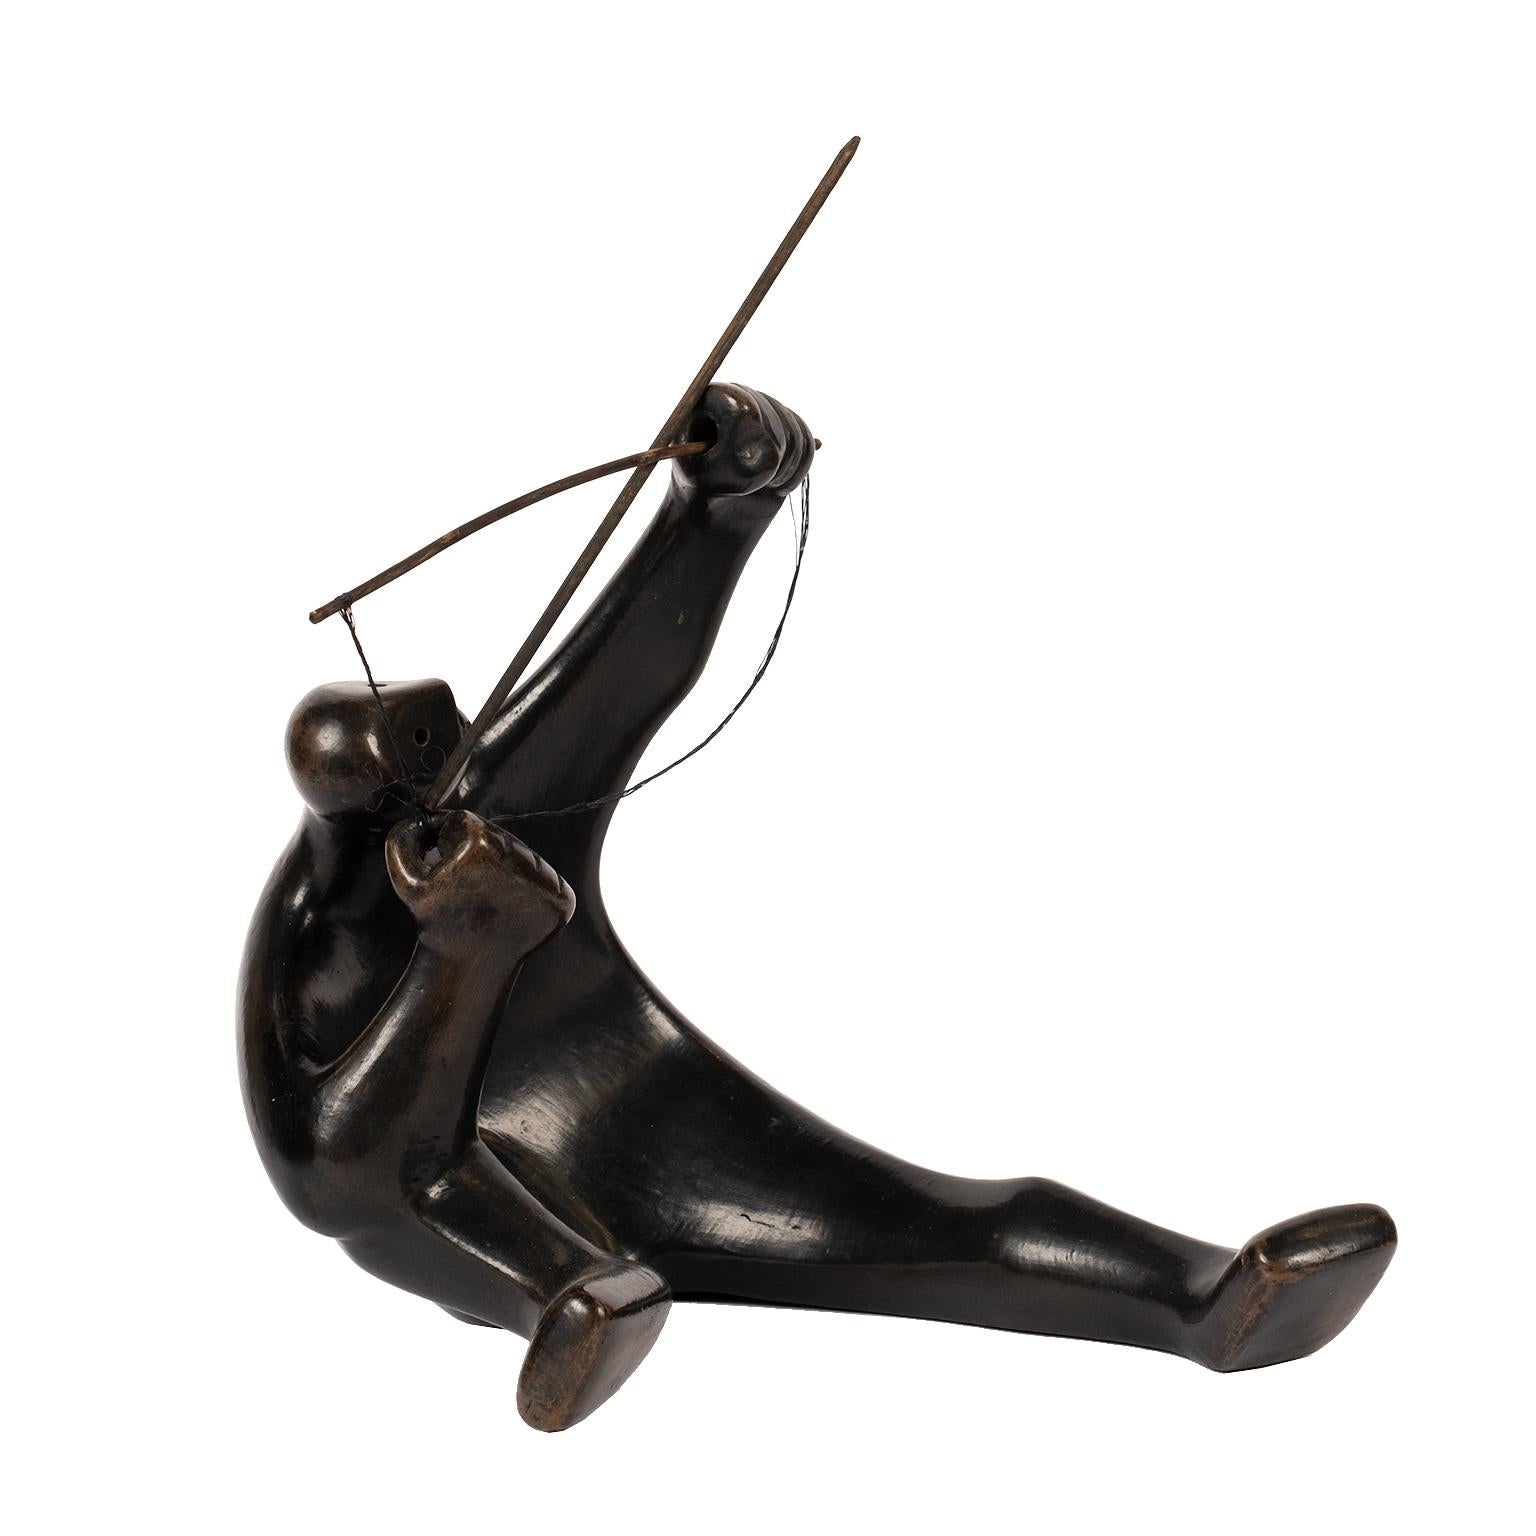 This dynamic “masked” hunter has a beautiful rich dark “bronze” patina. He is crouching and ready to launch his arrow / spear into the air.